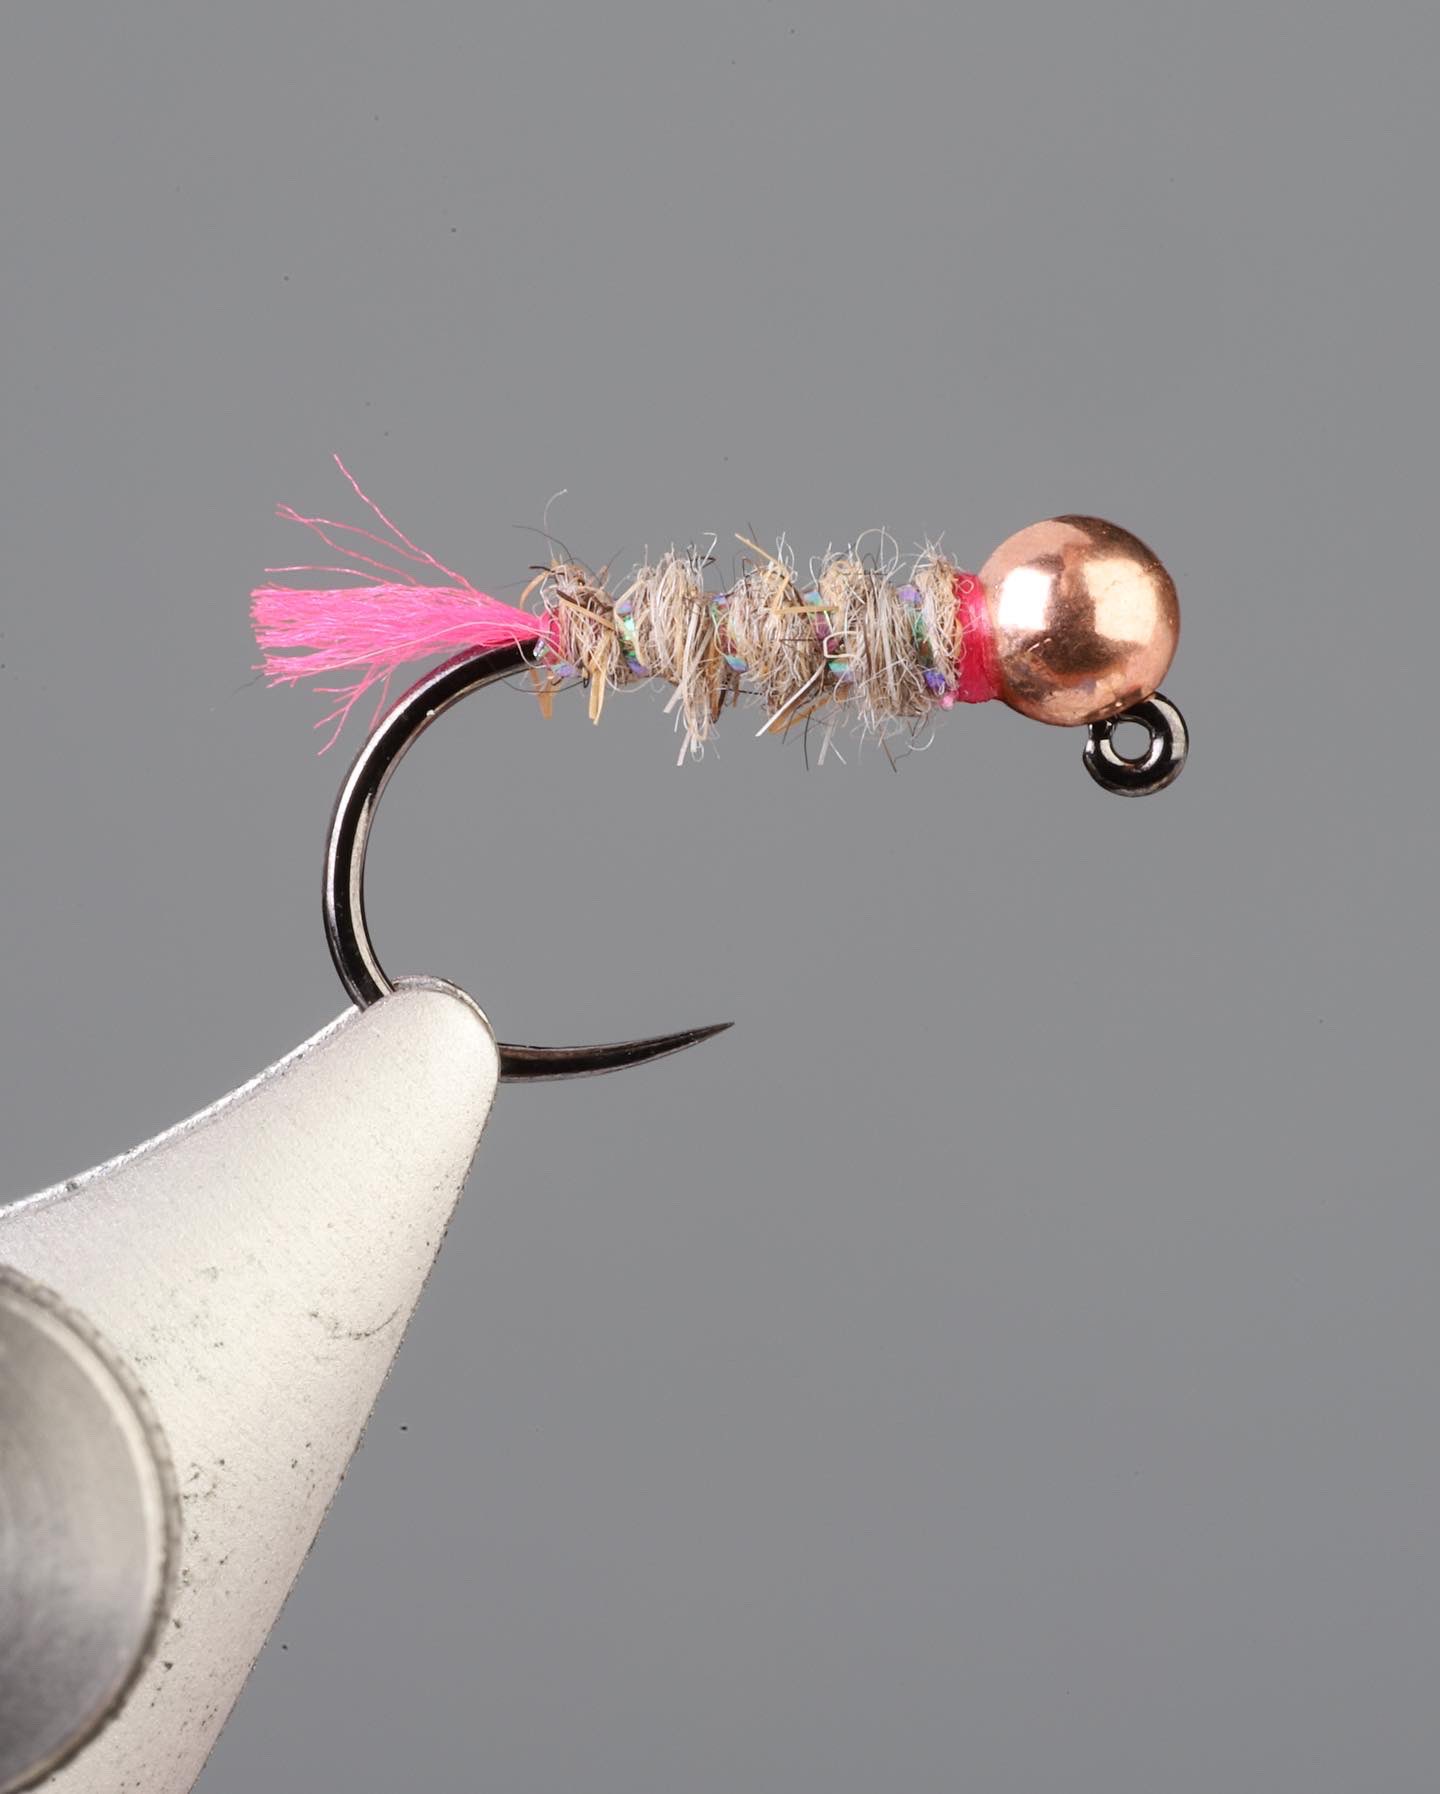 Tim Cammisa on X: Walt's Worm Blowtorch! This simple nymph is great flor fly  fishing in freestone and spring creeks. The hot spot tail gives trout and  char something to think about